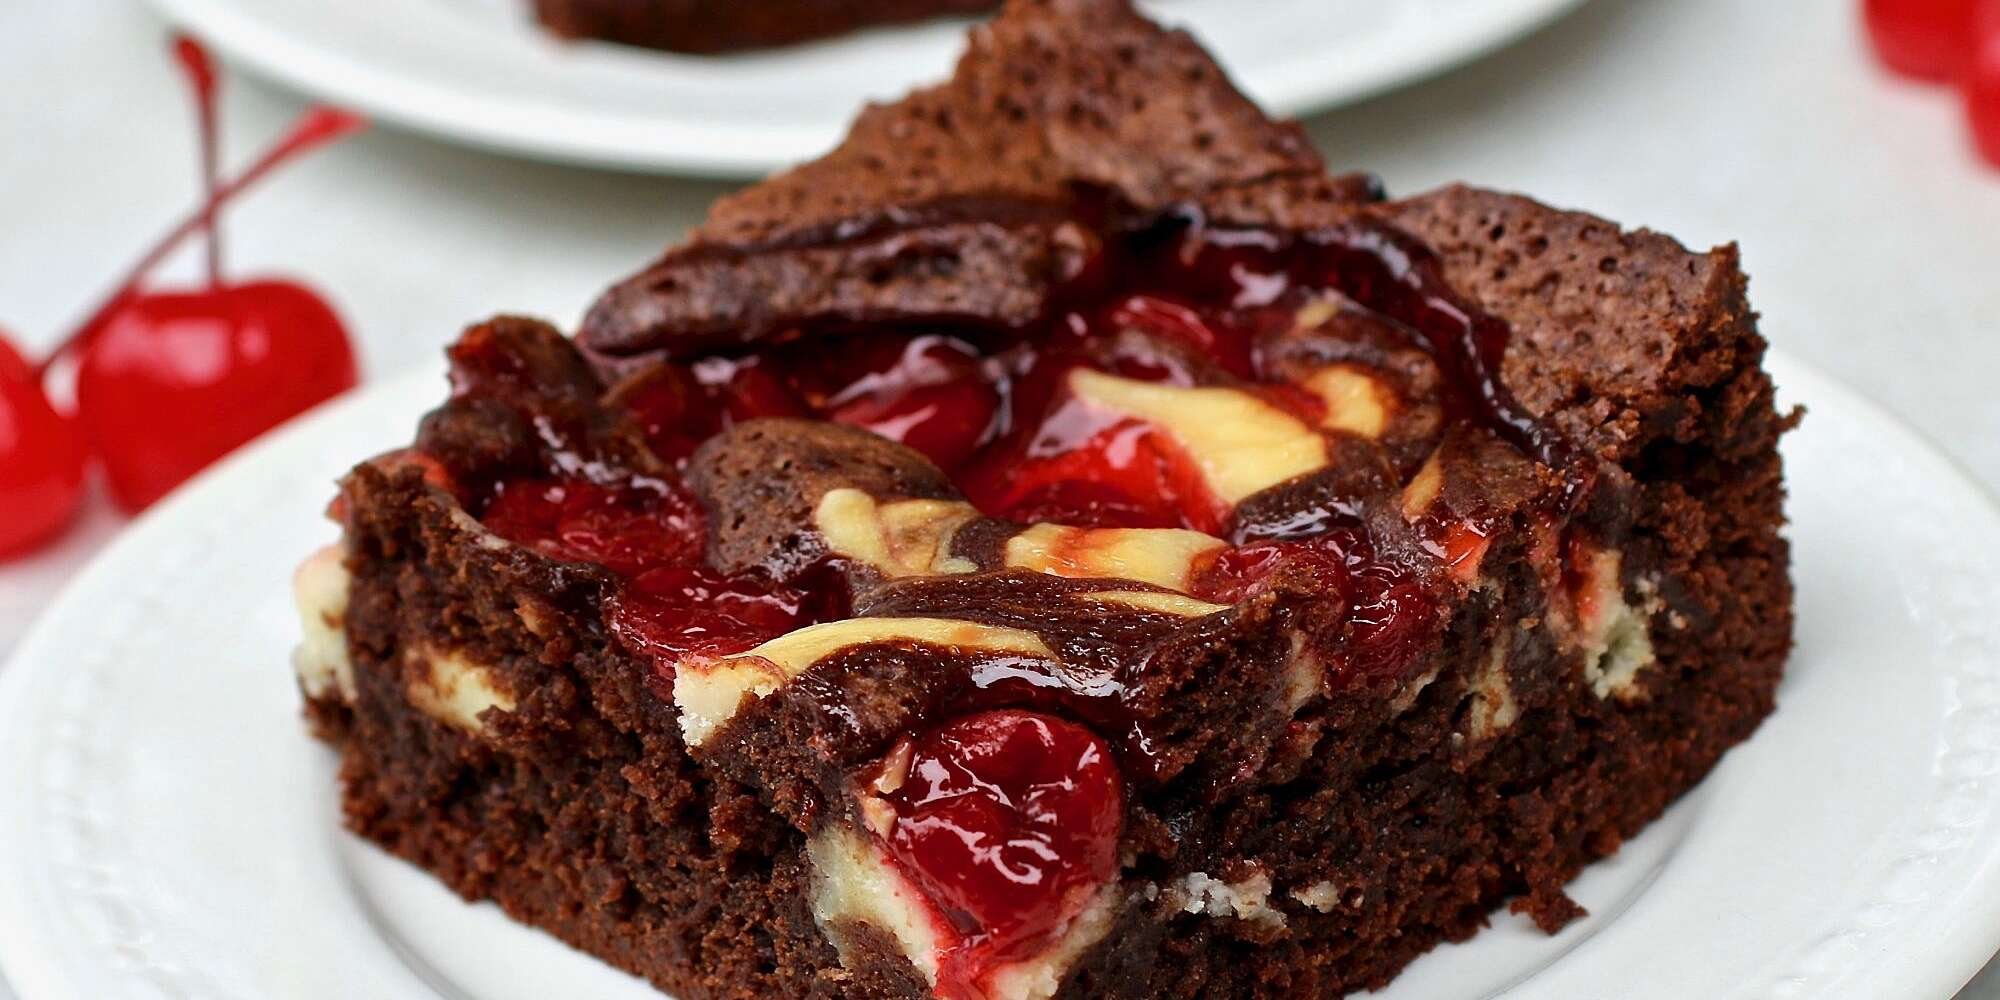 15 Brownie Recipes That Go Way Over the Top